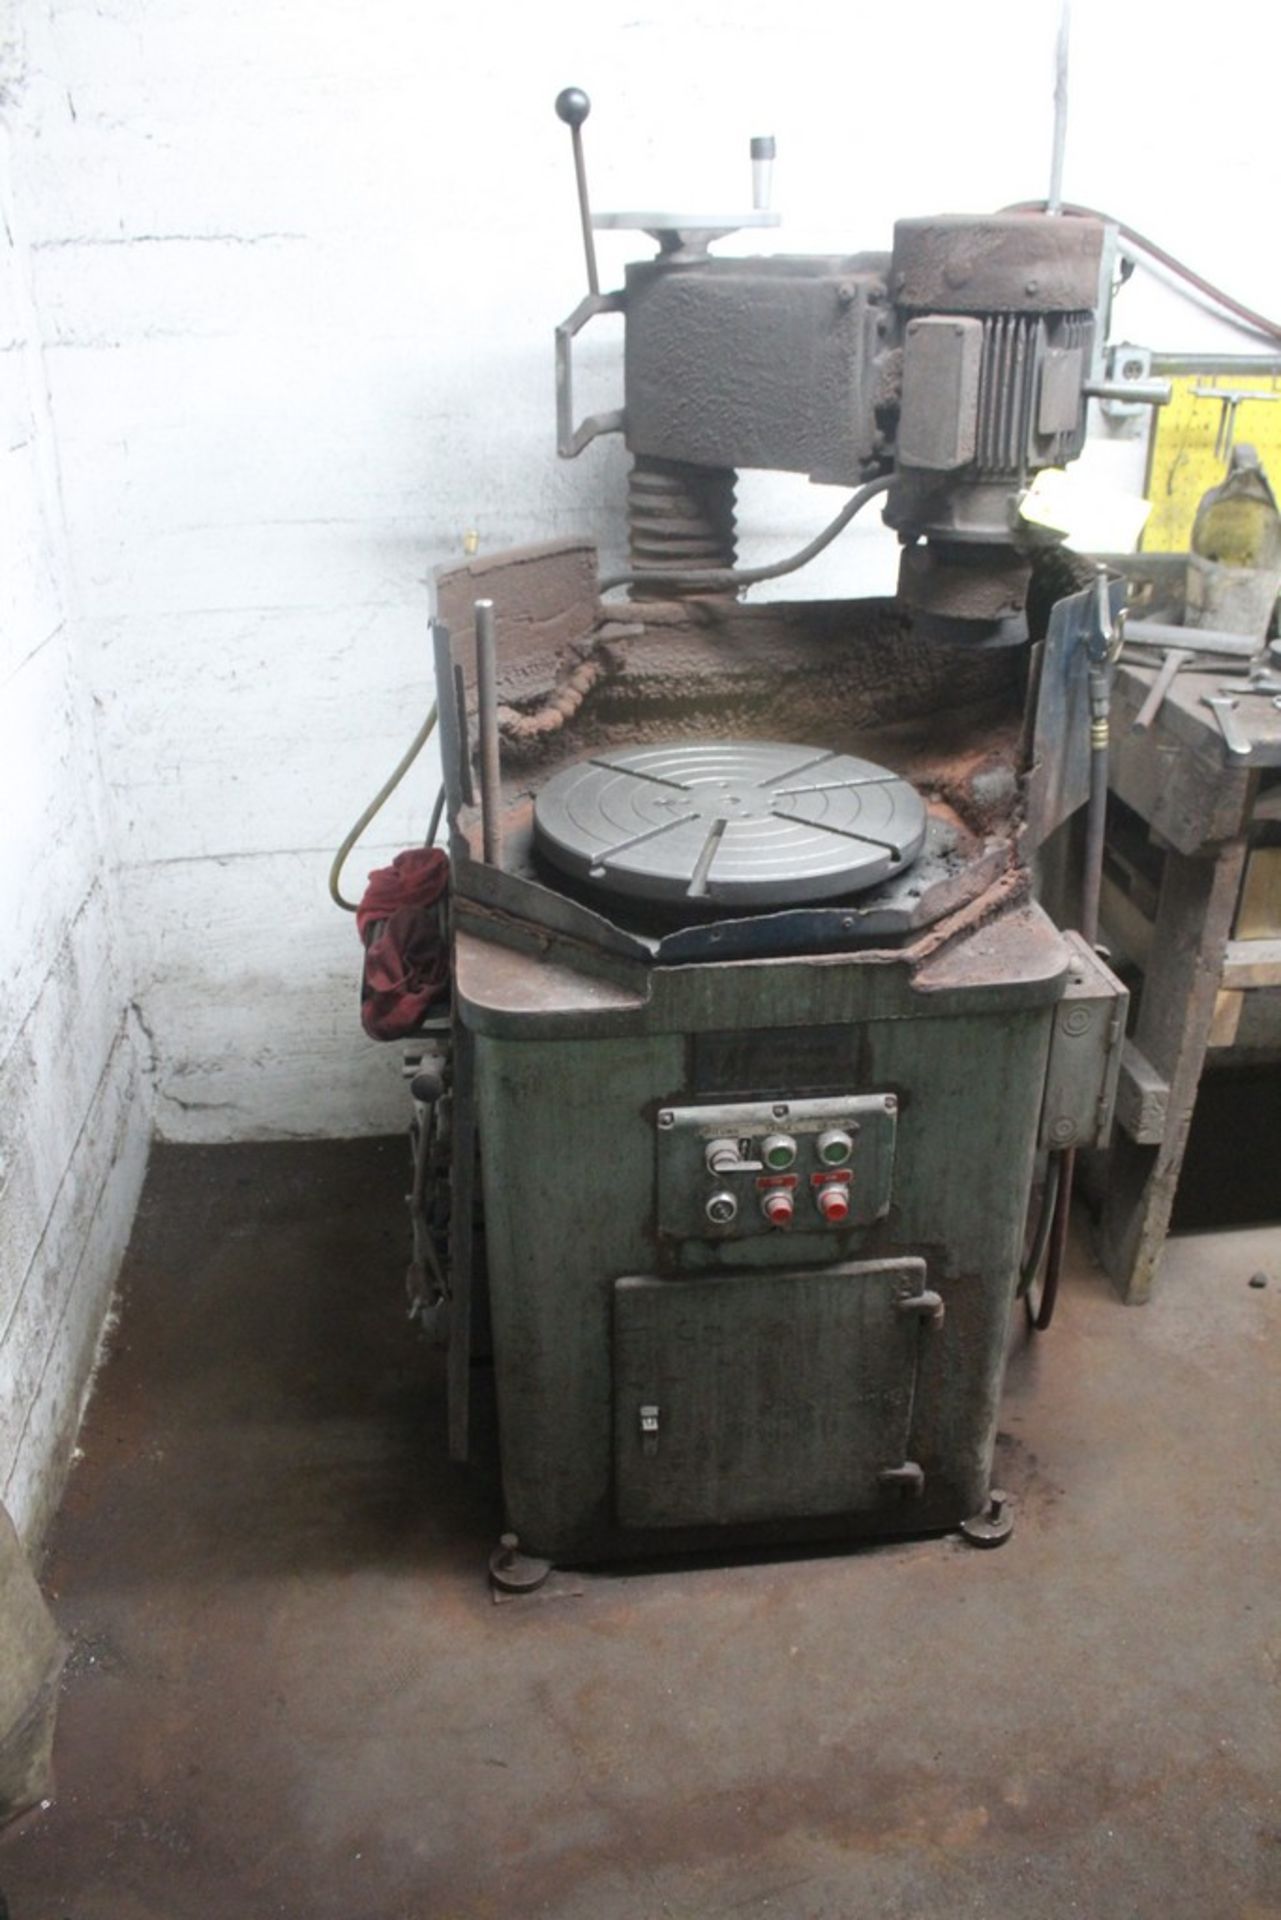 WINONA VAN NORMAN 18" ROTARY TABLE GRINDER - Image 3 of 4